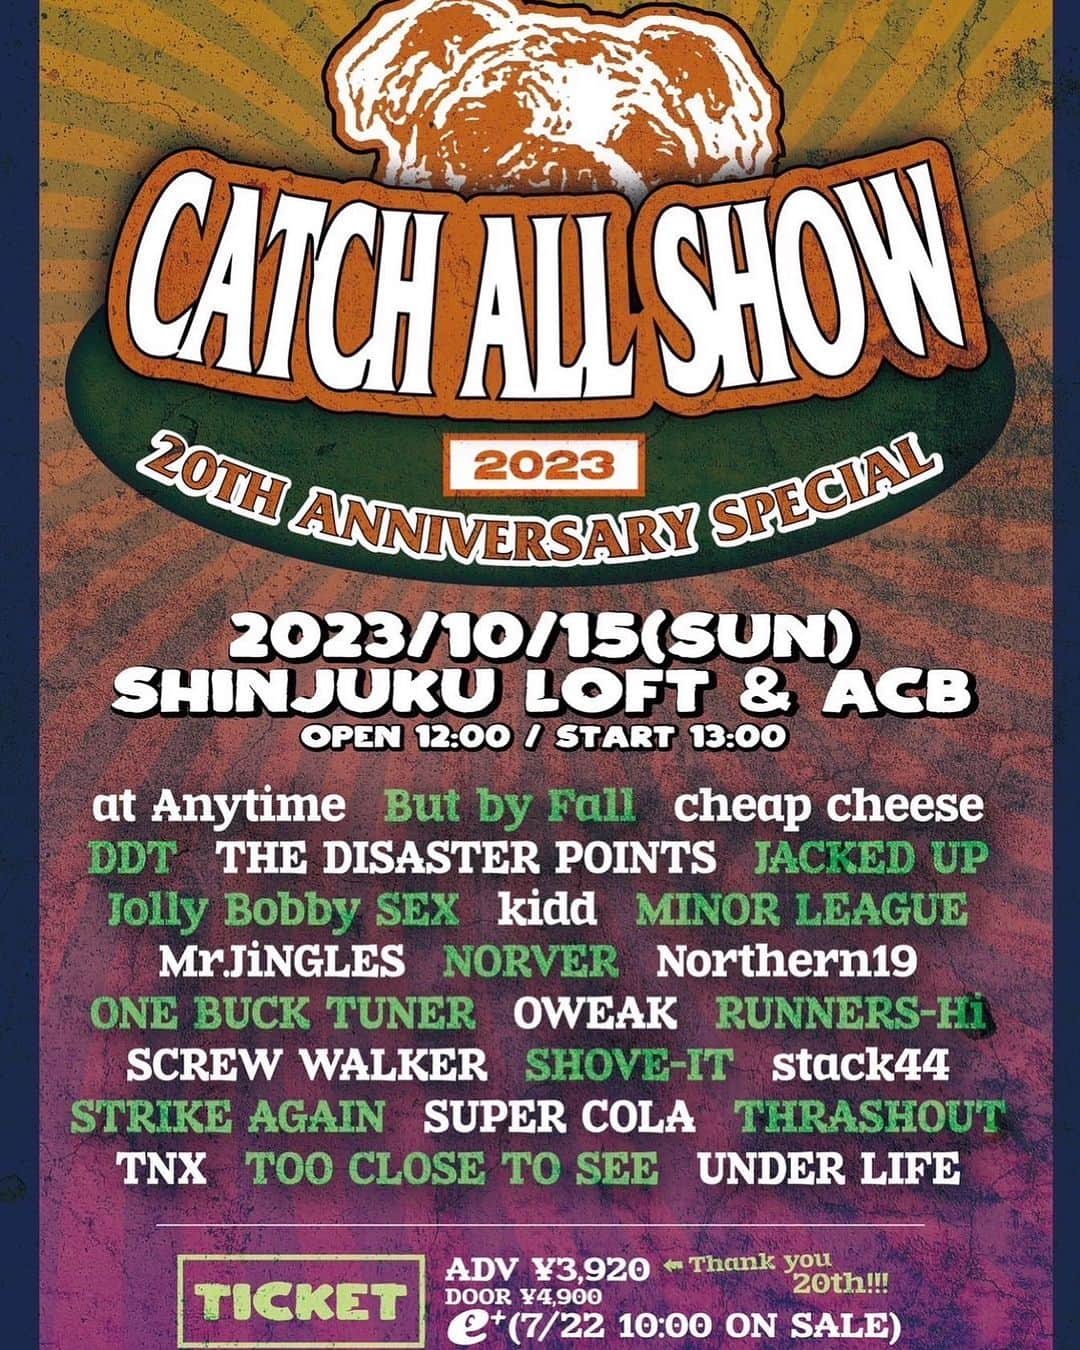 KO-TAのインスタグラム：「RUNNERS-Hi出演決定！！  CATCH ALL RECORDS pre. 【CATCH ALL SHOW 2023】 〜20TH ANNIVERSARY SPECIAL〜  2023/10/15(SUN) SHINJUKU LOFT & ACB  at Anytime But by Fall cheap cheese DDT THE DISASTER POINTS JACKED UP Jolly Bobby SEX kidd MINOR LEAGUE Mr.JiNGLES NORVER Northern19 ONE BUCK TUNER OWEAK RUNNERS-Hi SCREW WALKER SHOVE-IT stack44 STRIKE AGAIN SUPER COLA THRASHOUT TNX TOO CLOSE TO SEE UNDER LIFE (A to Z)  ADV / ¥3,920 DOOR / ¥4,900  OPEN / 12:00 START / 13:00  TICKET e+（7/22 10:00 ON SALE） https://eplus.jp/sf/detail/3920160001-P0030001  INFO https://catchallcorp.com/」